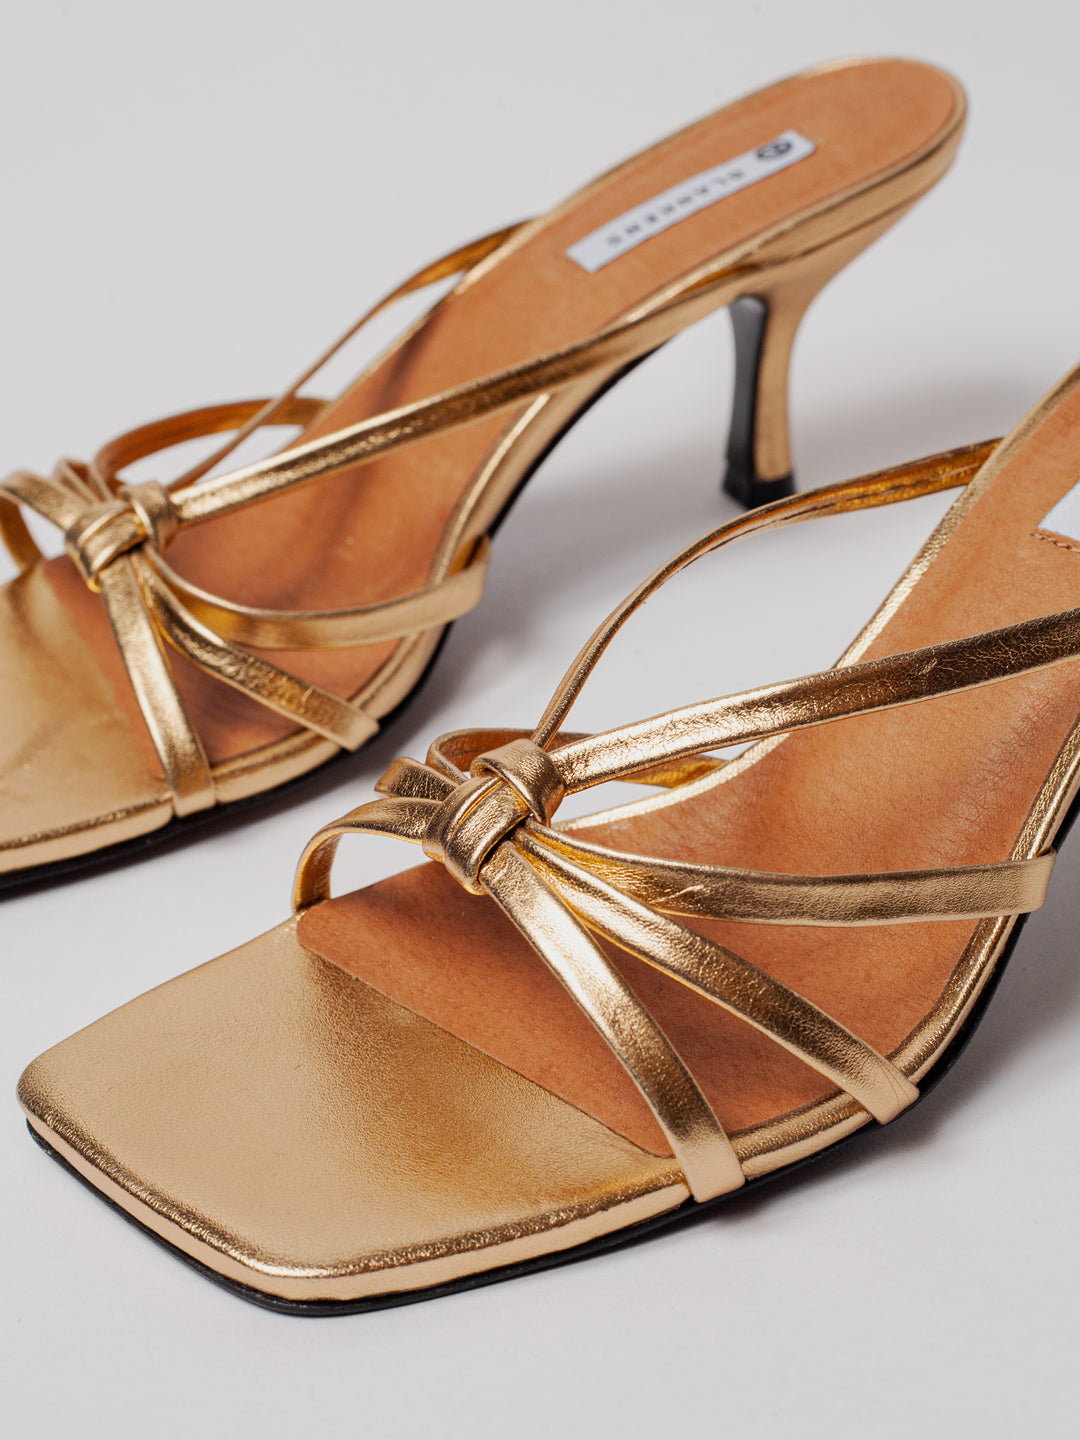 Blankens gold leather heel sandal. Made in Euope. 